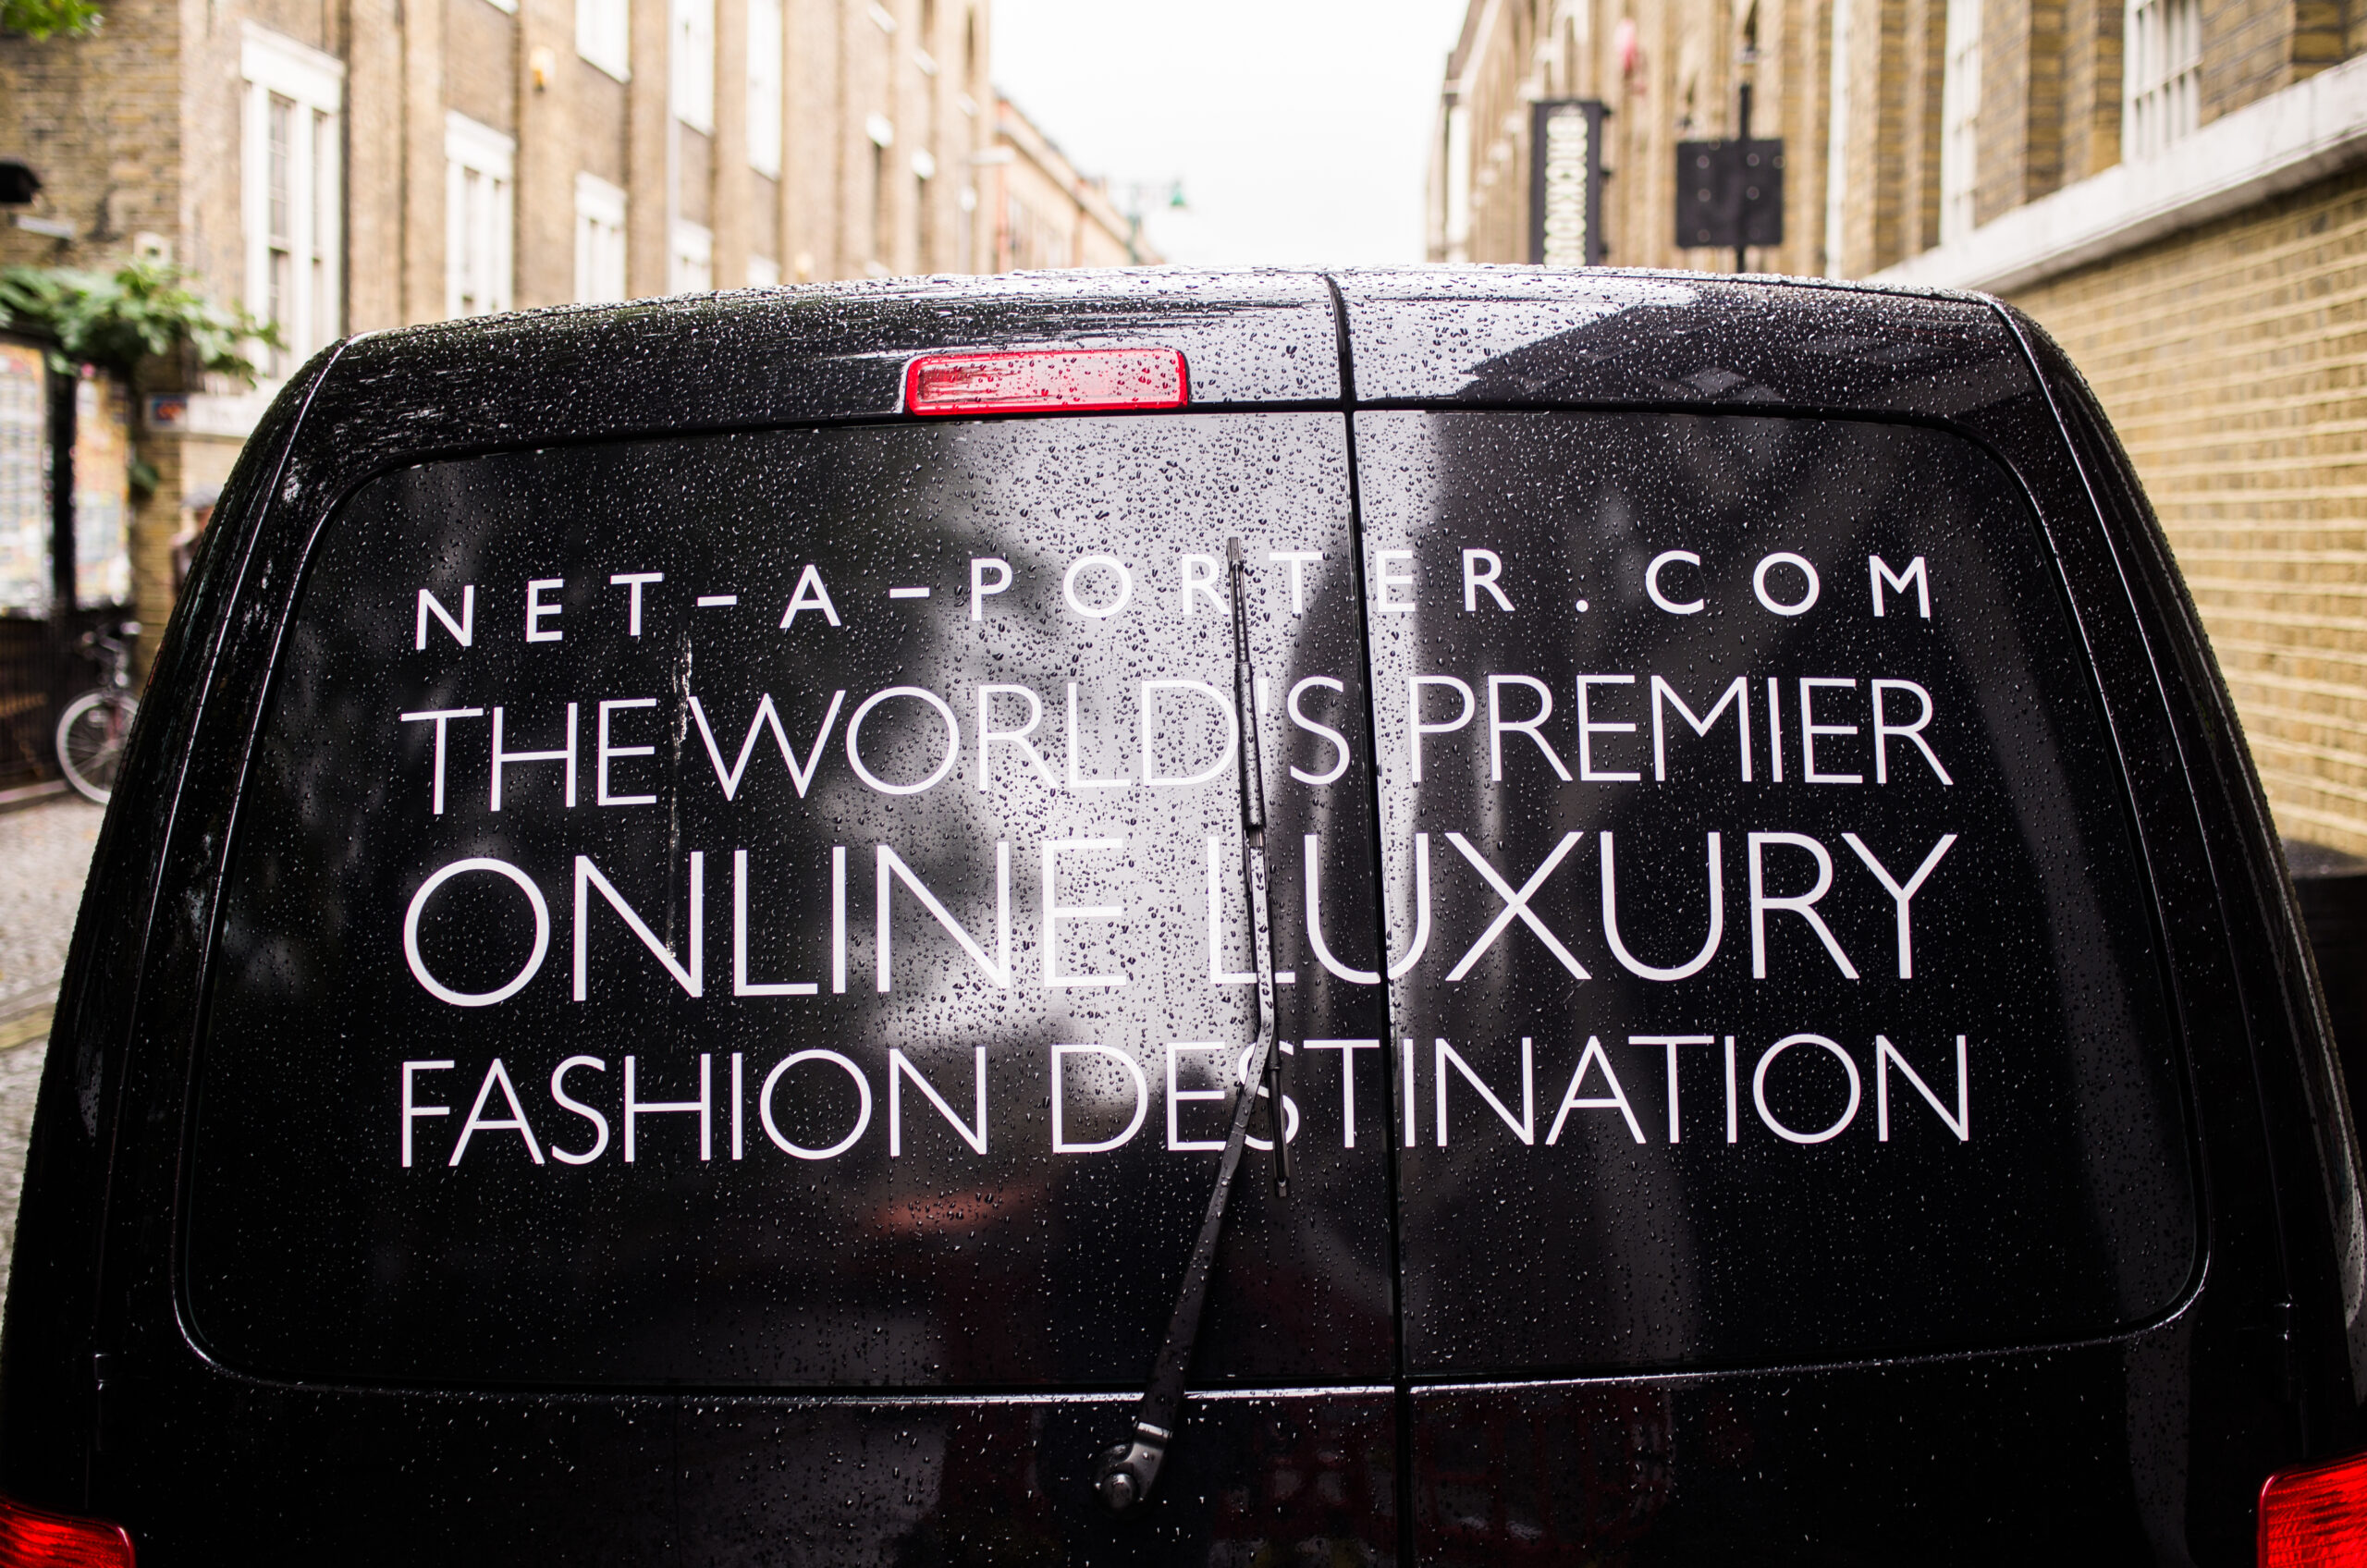 London,uk-august,26,2011:,Van,Of,The,Company,Net-a-porter,Delivrs,Items,In